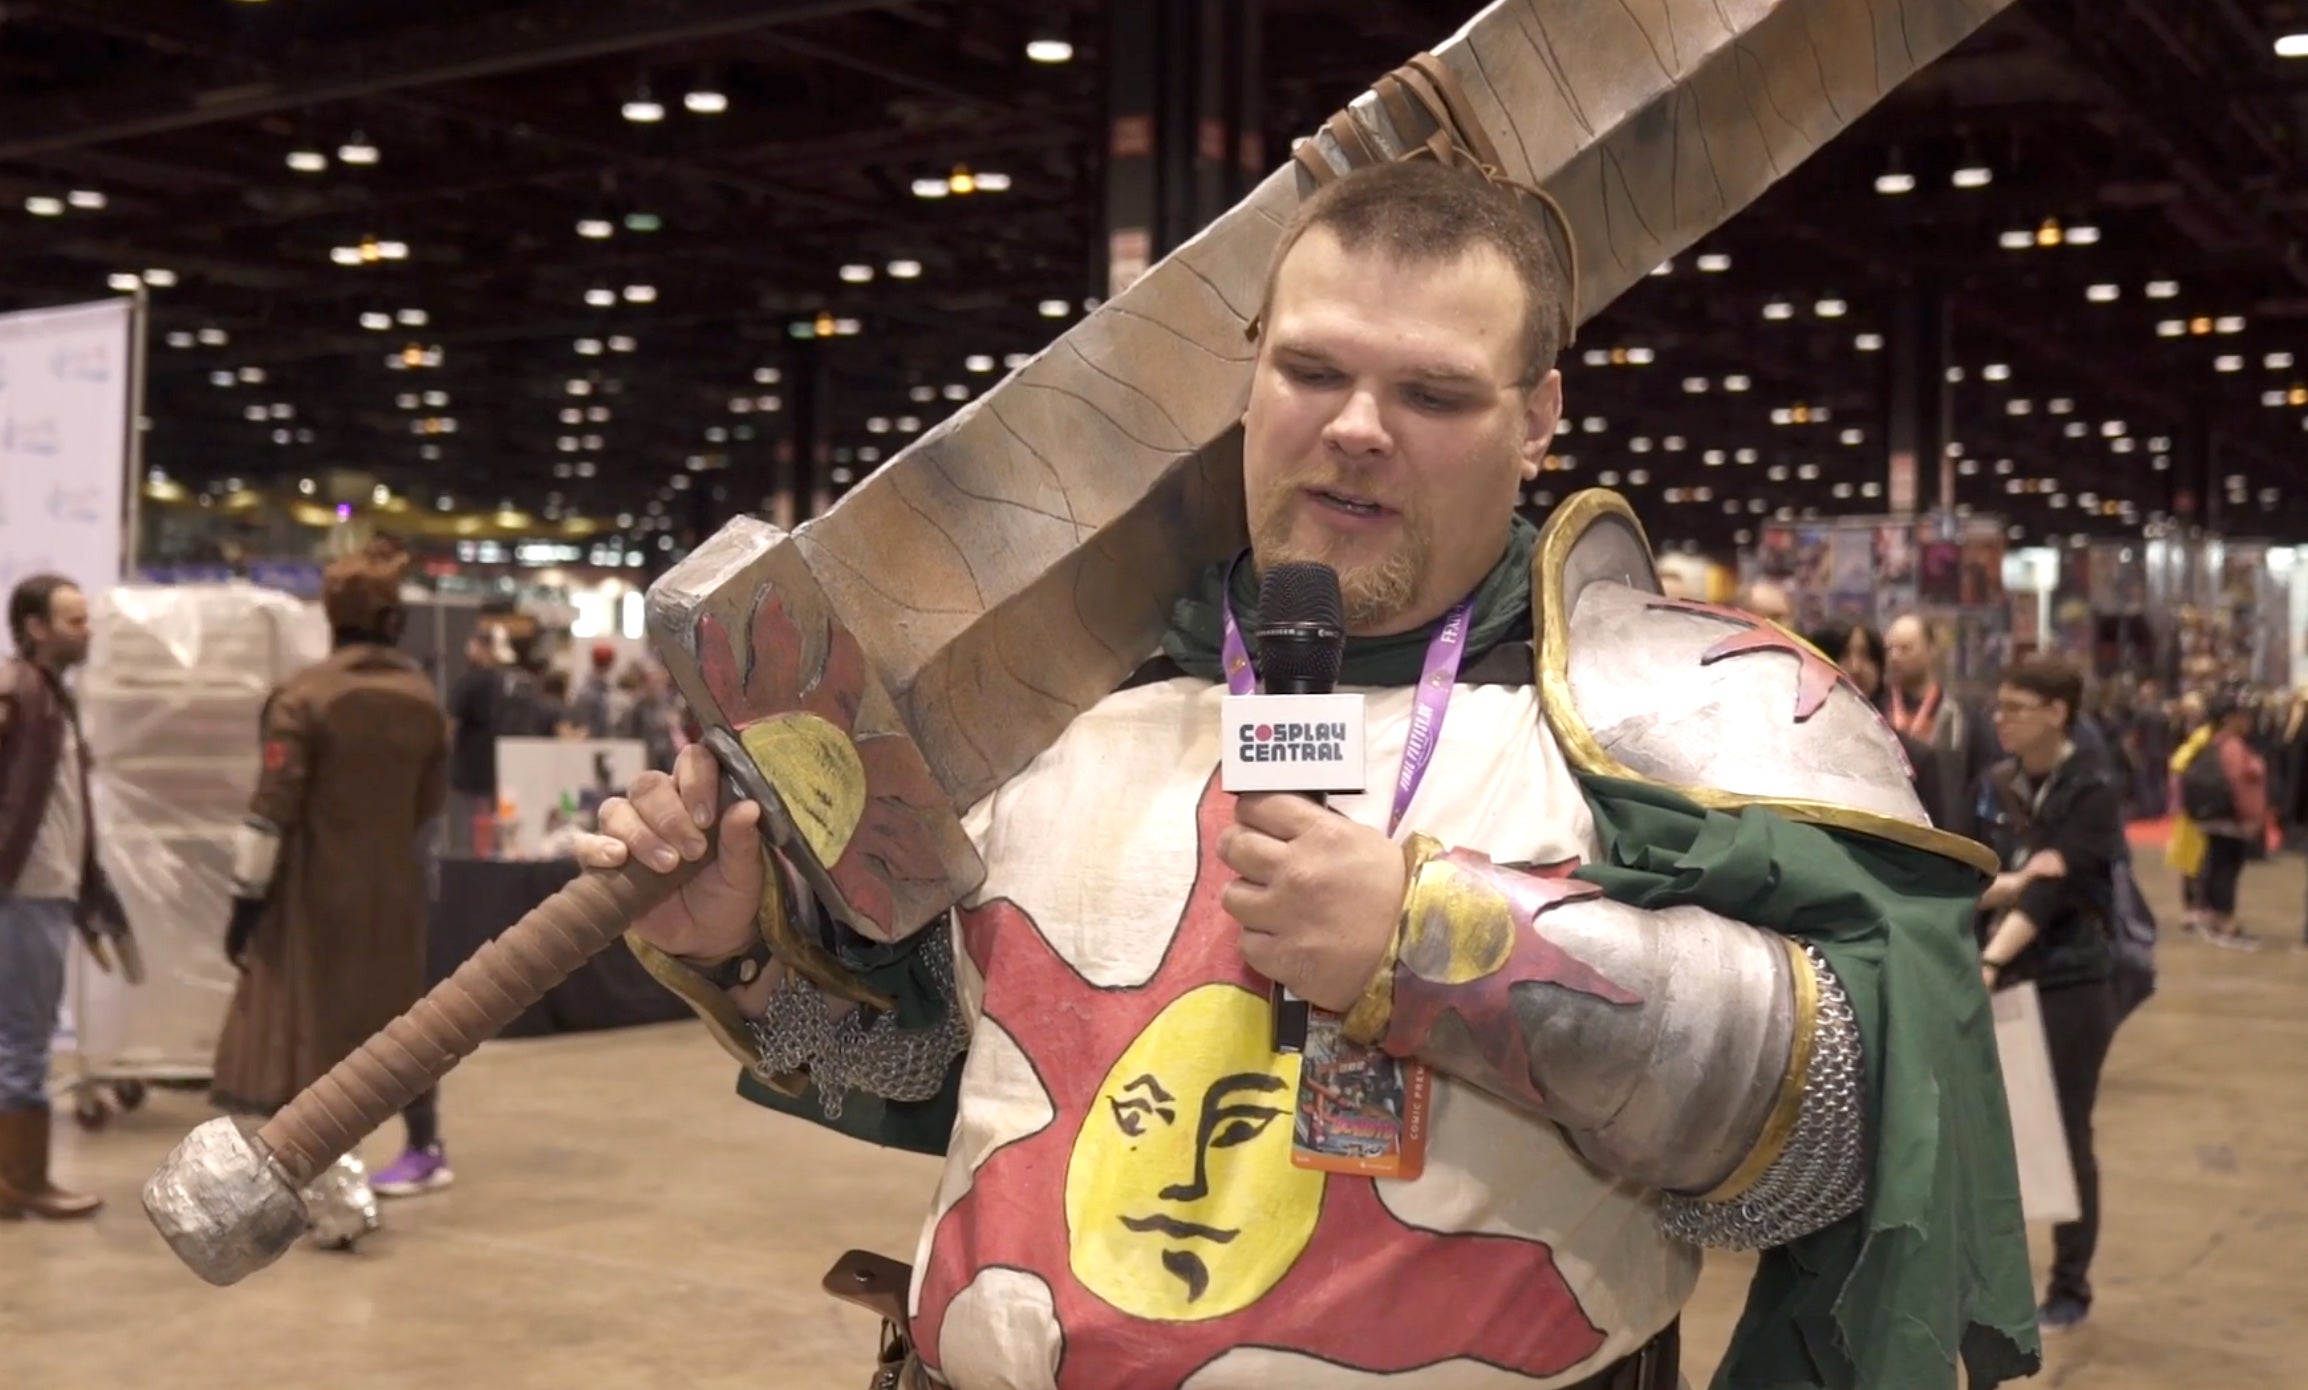 Cosplayer dressed as Solaire of Astora from the Dark Souls video game franchise.